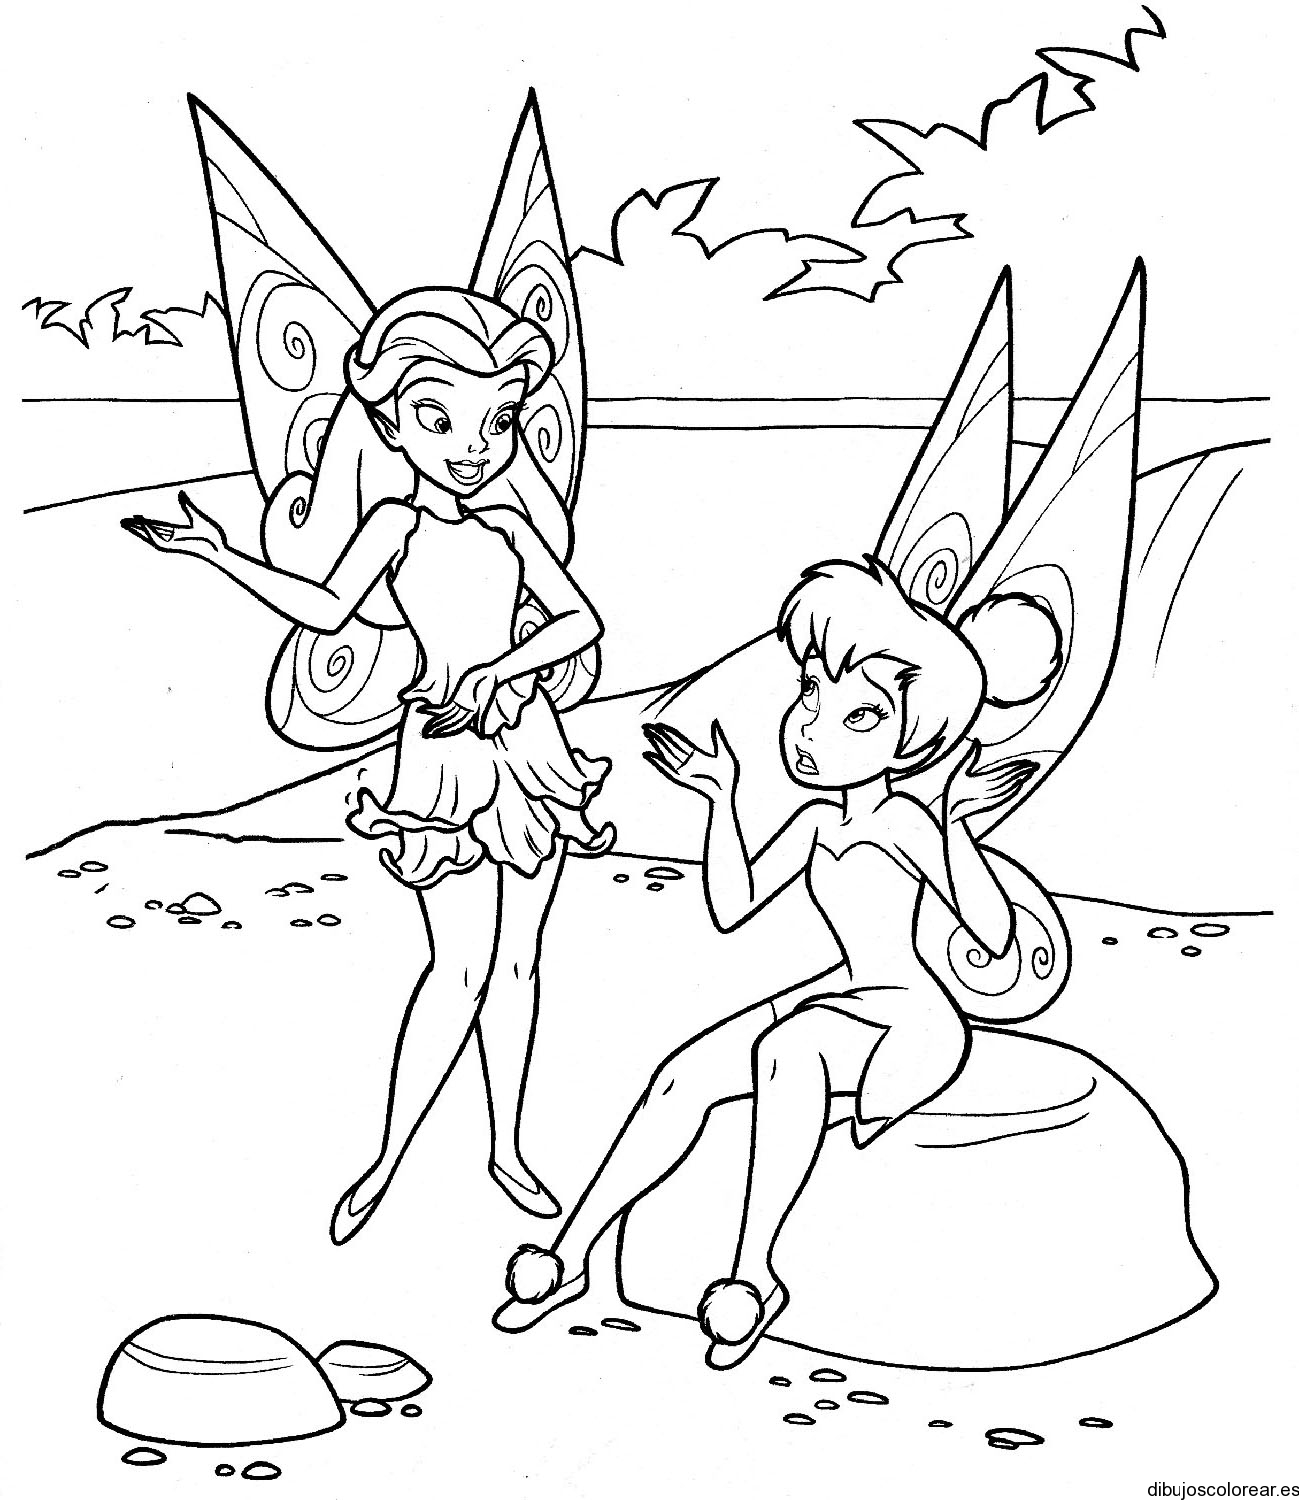 hairdresser coloring pages for kids - photo #47